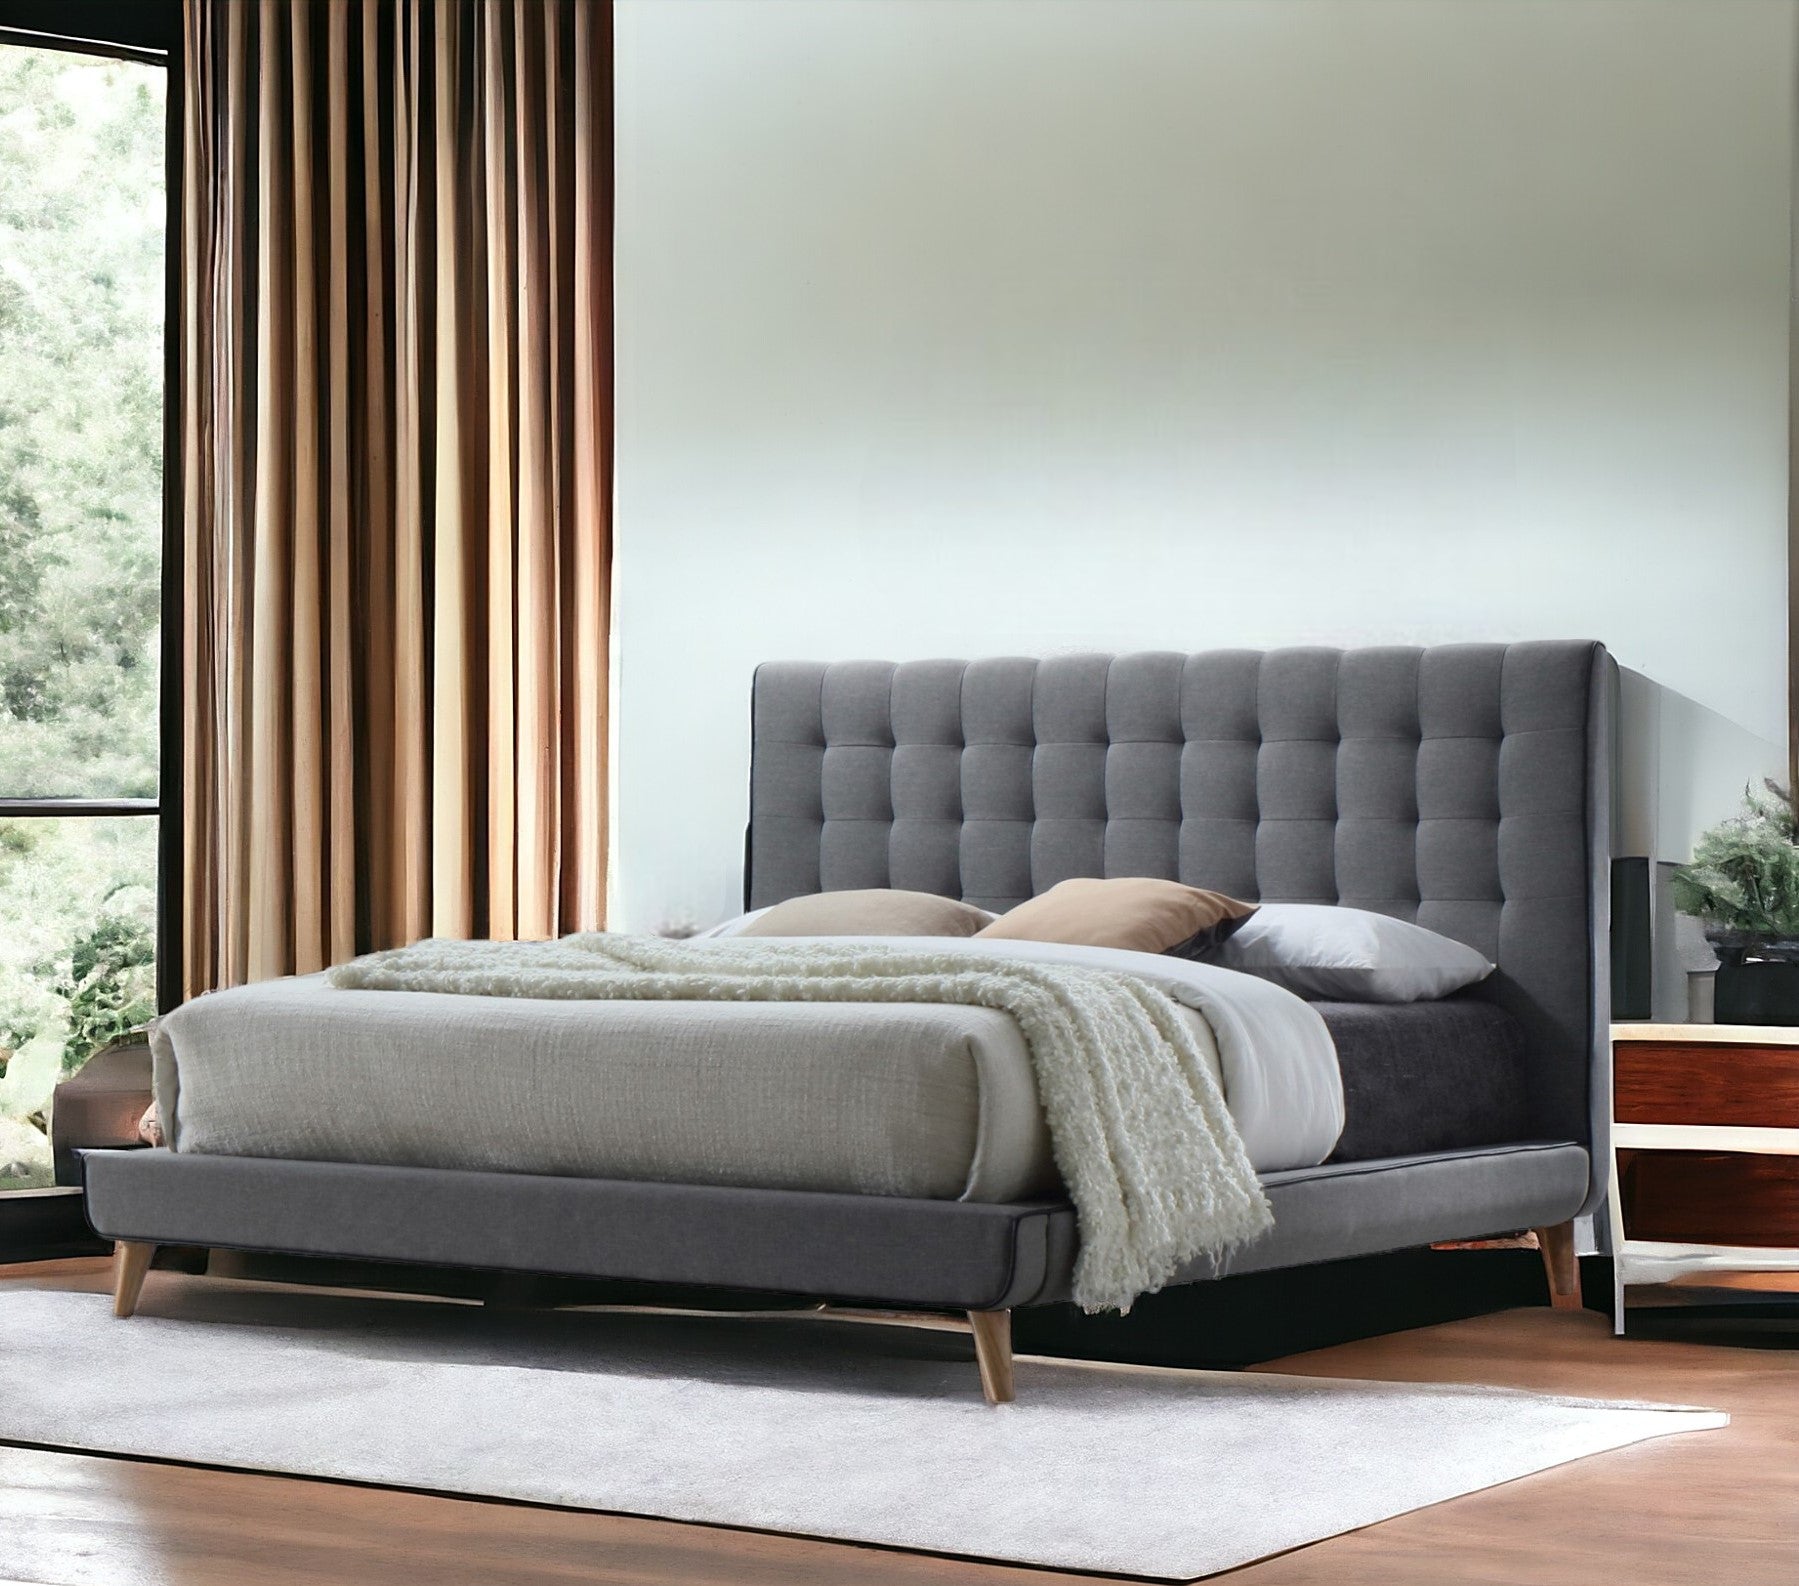 King Tufted Gray And Light Gray Upholstered Linen Bed